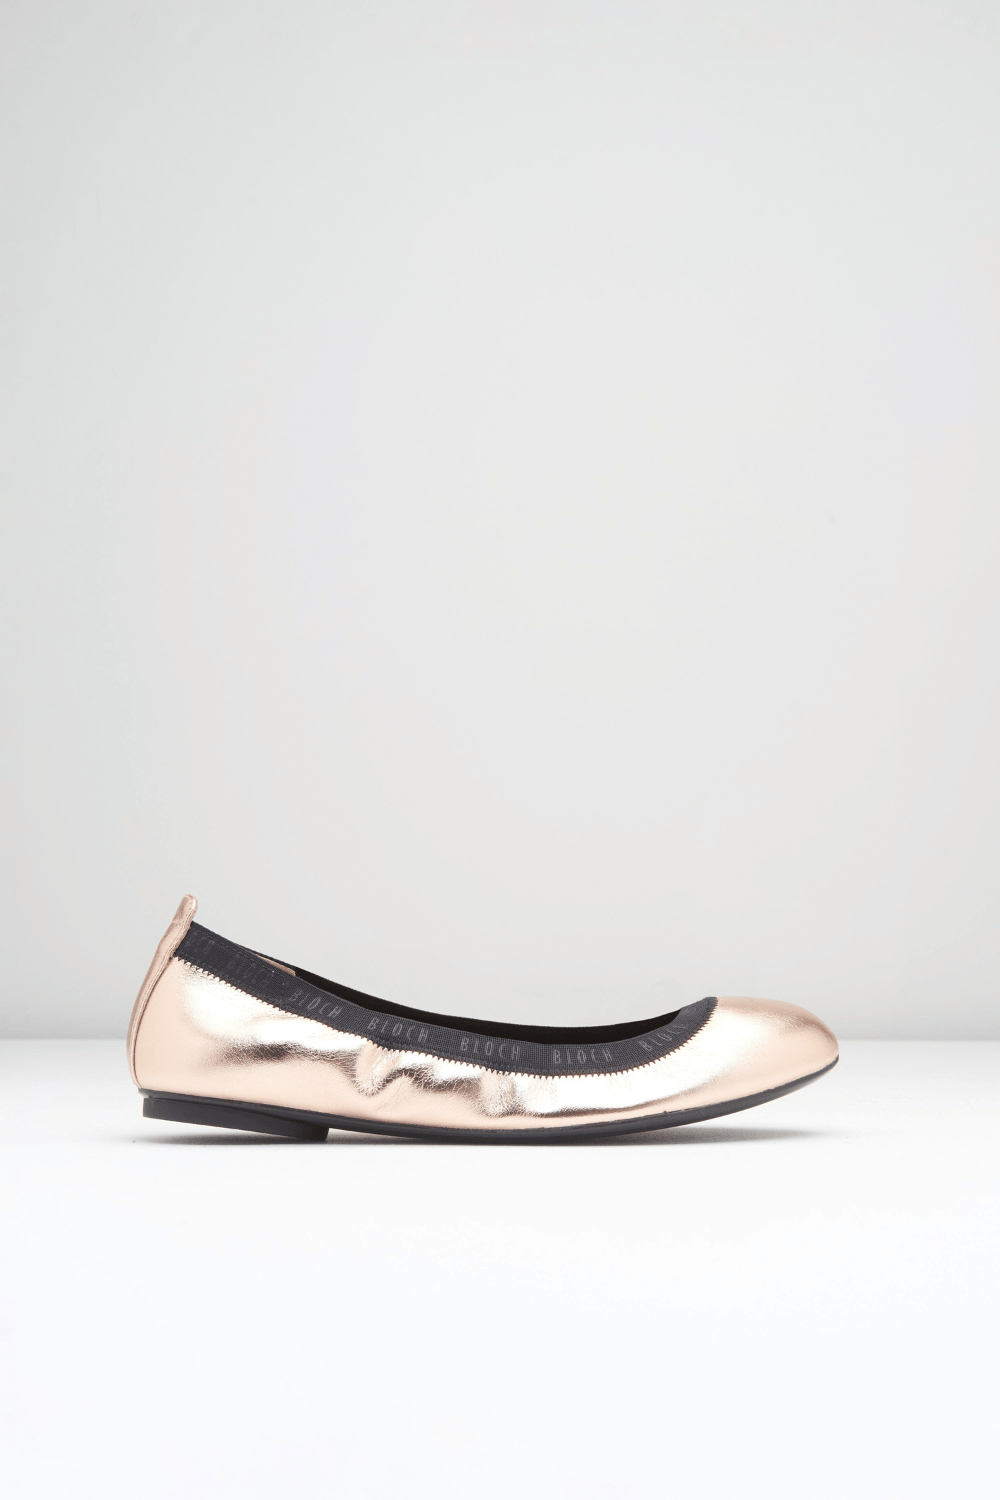 BLOCH Ladies Carina Ballet Pumps, Rame Leather